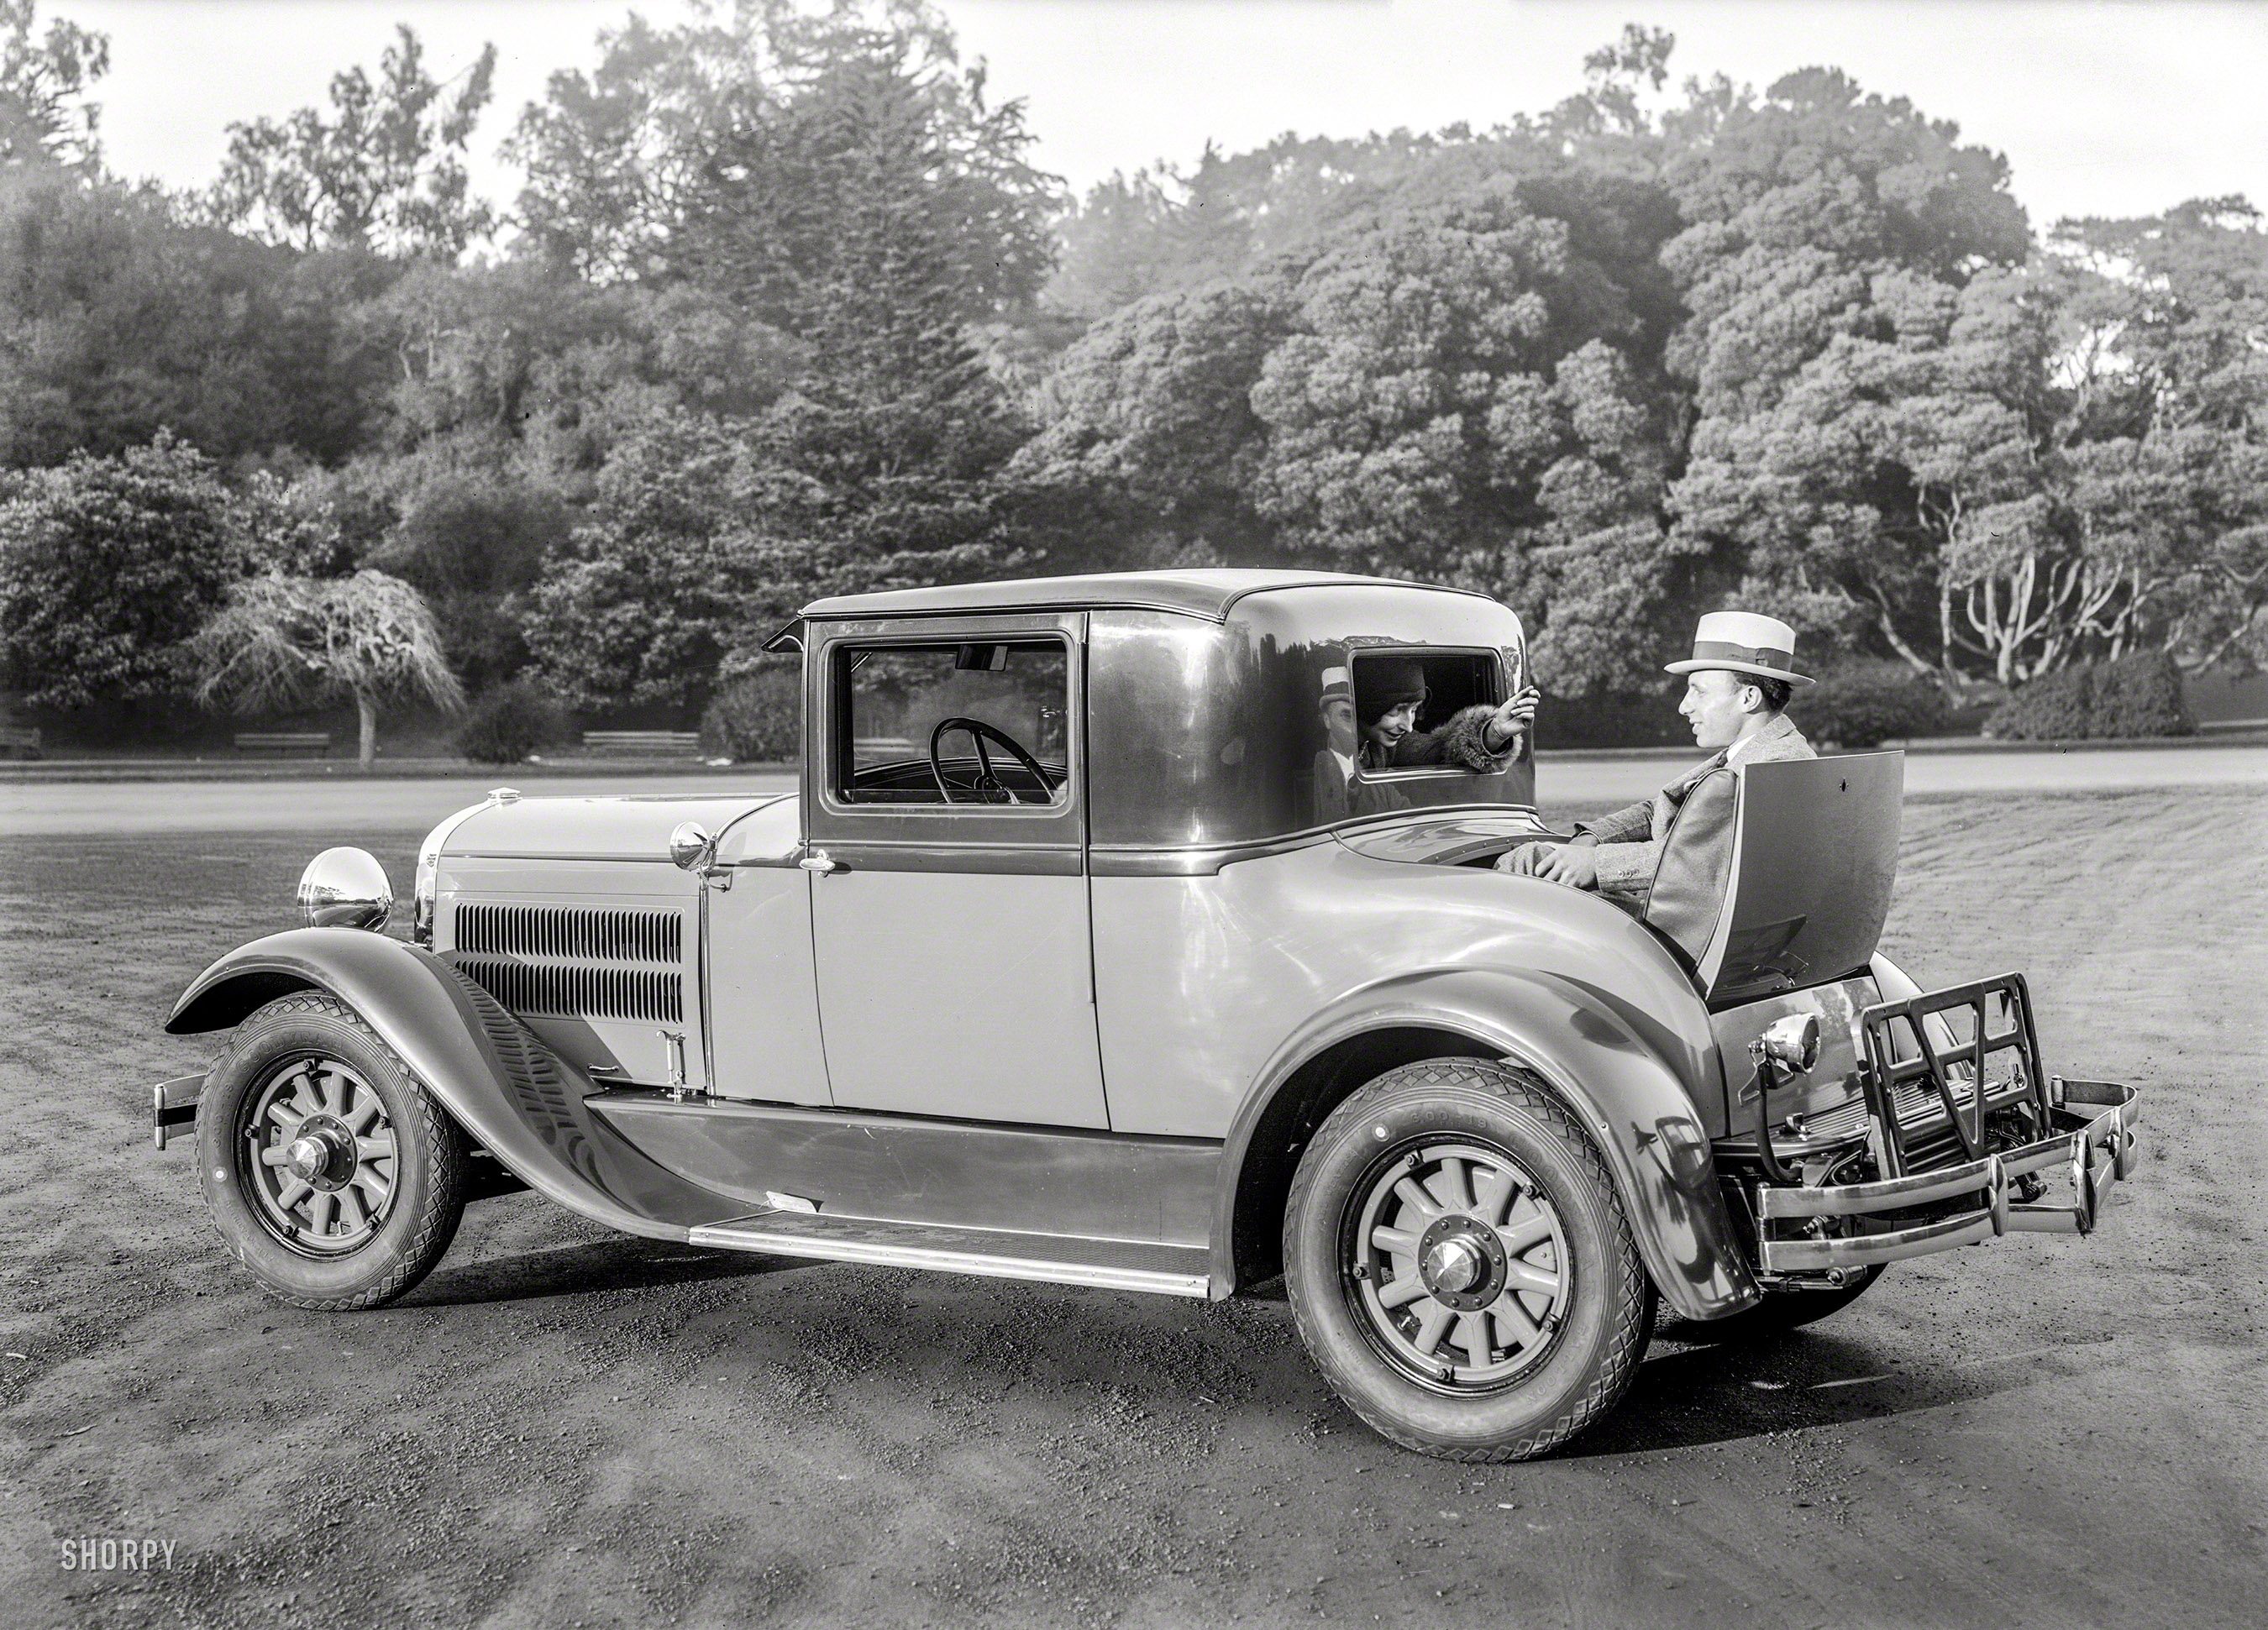 "1928 Hudson." Somewhere in the Bay Area. Pass me the flask, will you? (And who's driving this rig?) 5x7 glass negative by Christopher Helin. View full size.